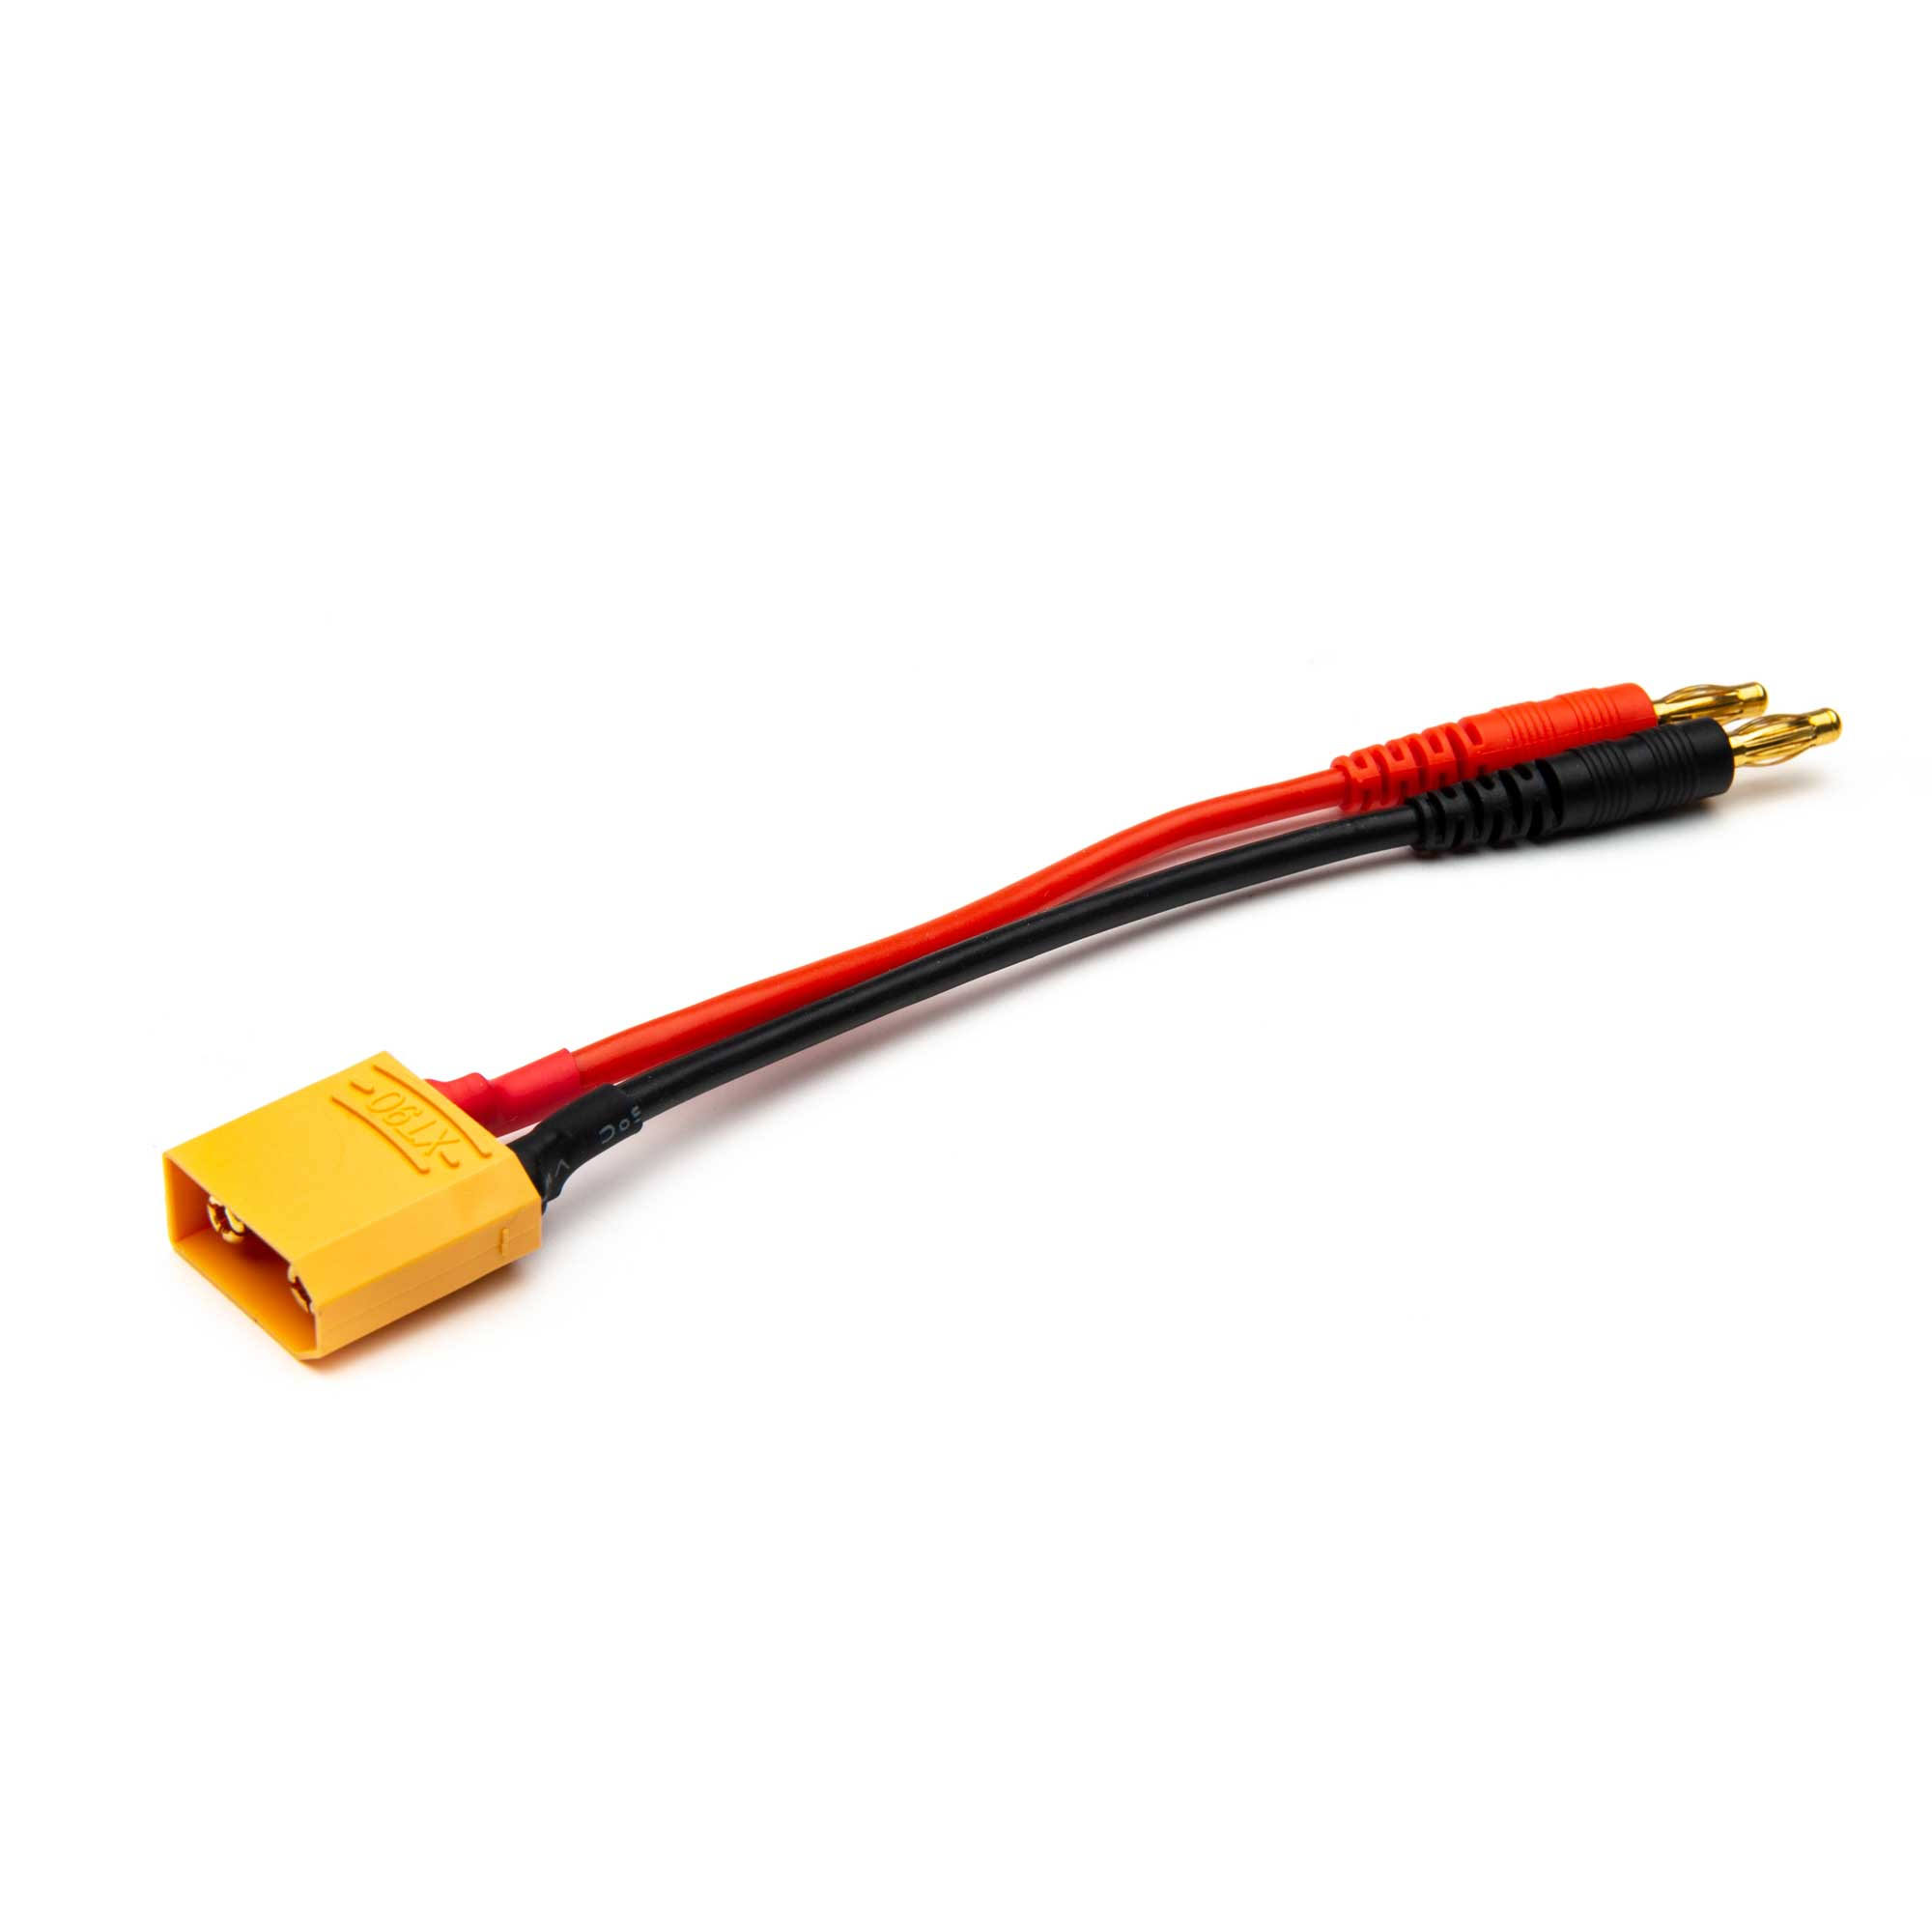 DYN C0174 Charge Adapter: Banana to XT90 Male